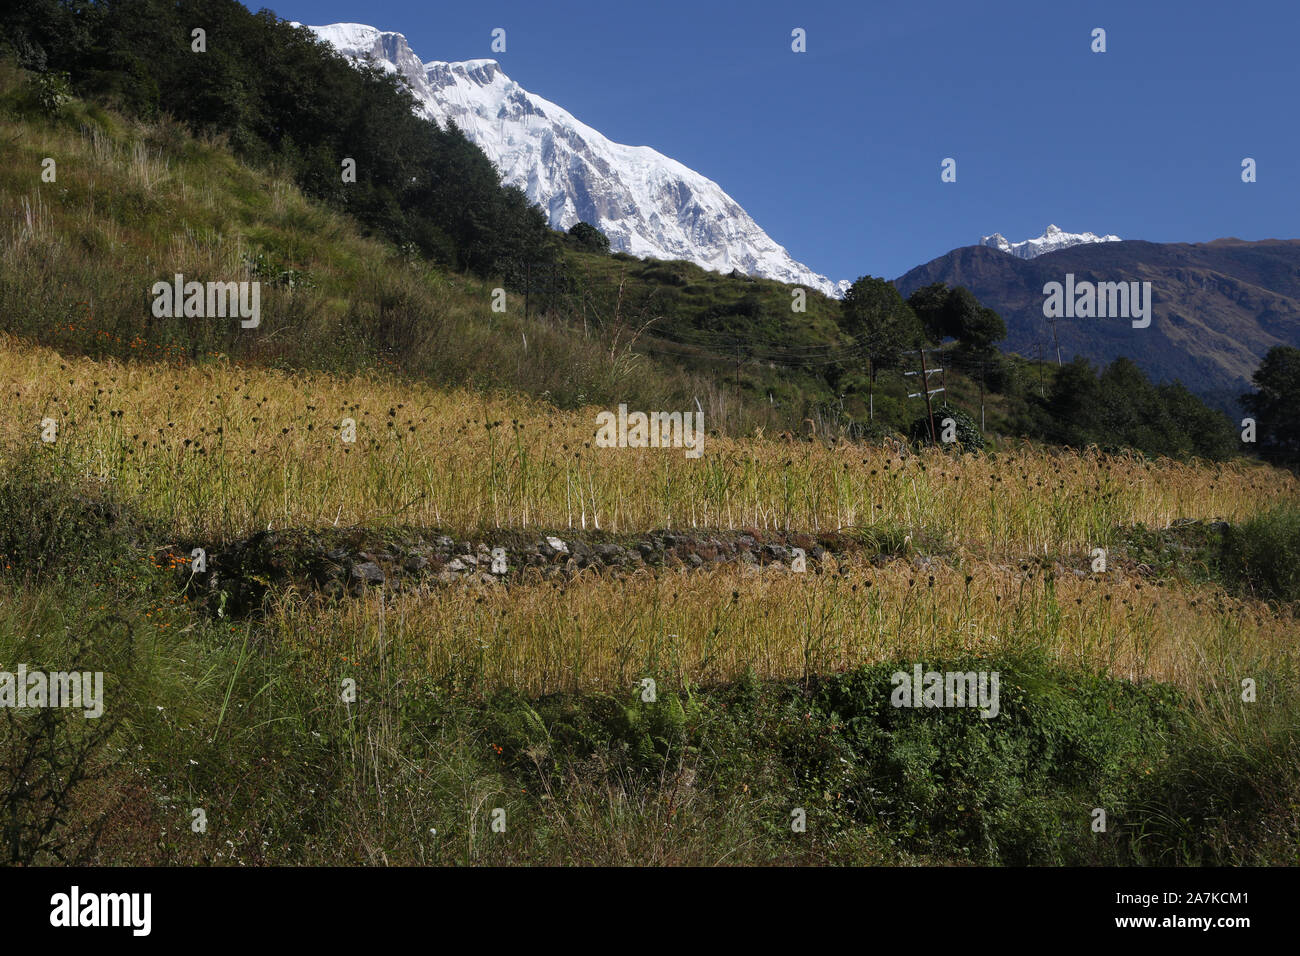 A field of Millet near the village of Sikles, Annapurna region, Nepal. Lamjung Himal can be seen in the background. Stock Photo